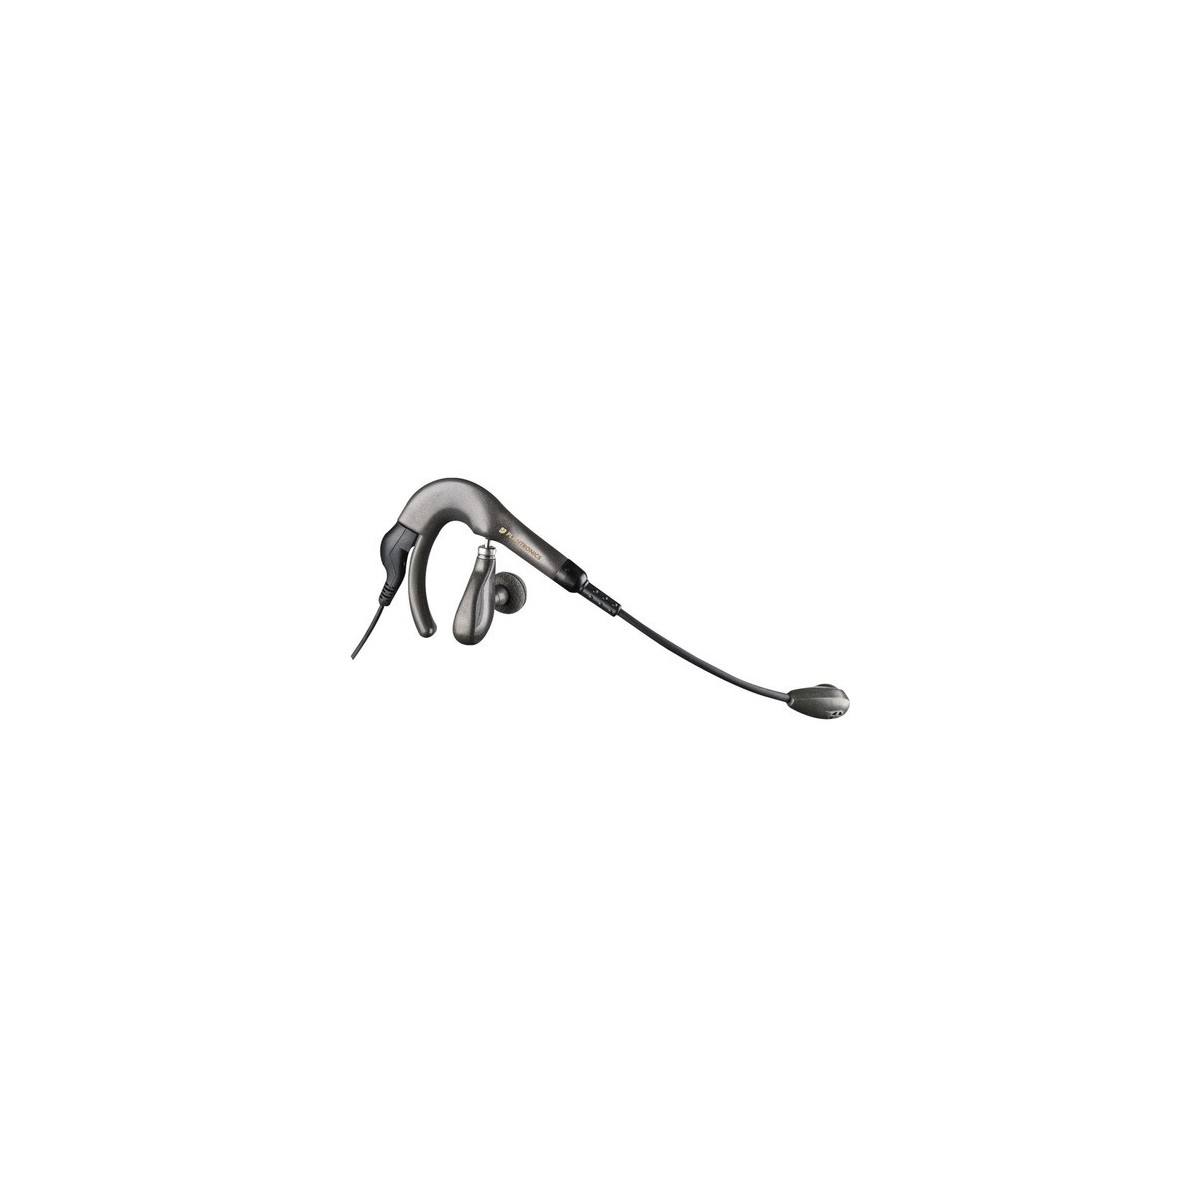 Poly H81N-CD - Headset - Ear-hook,In-ear - Office-Call center - Black - Monaural - Wired